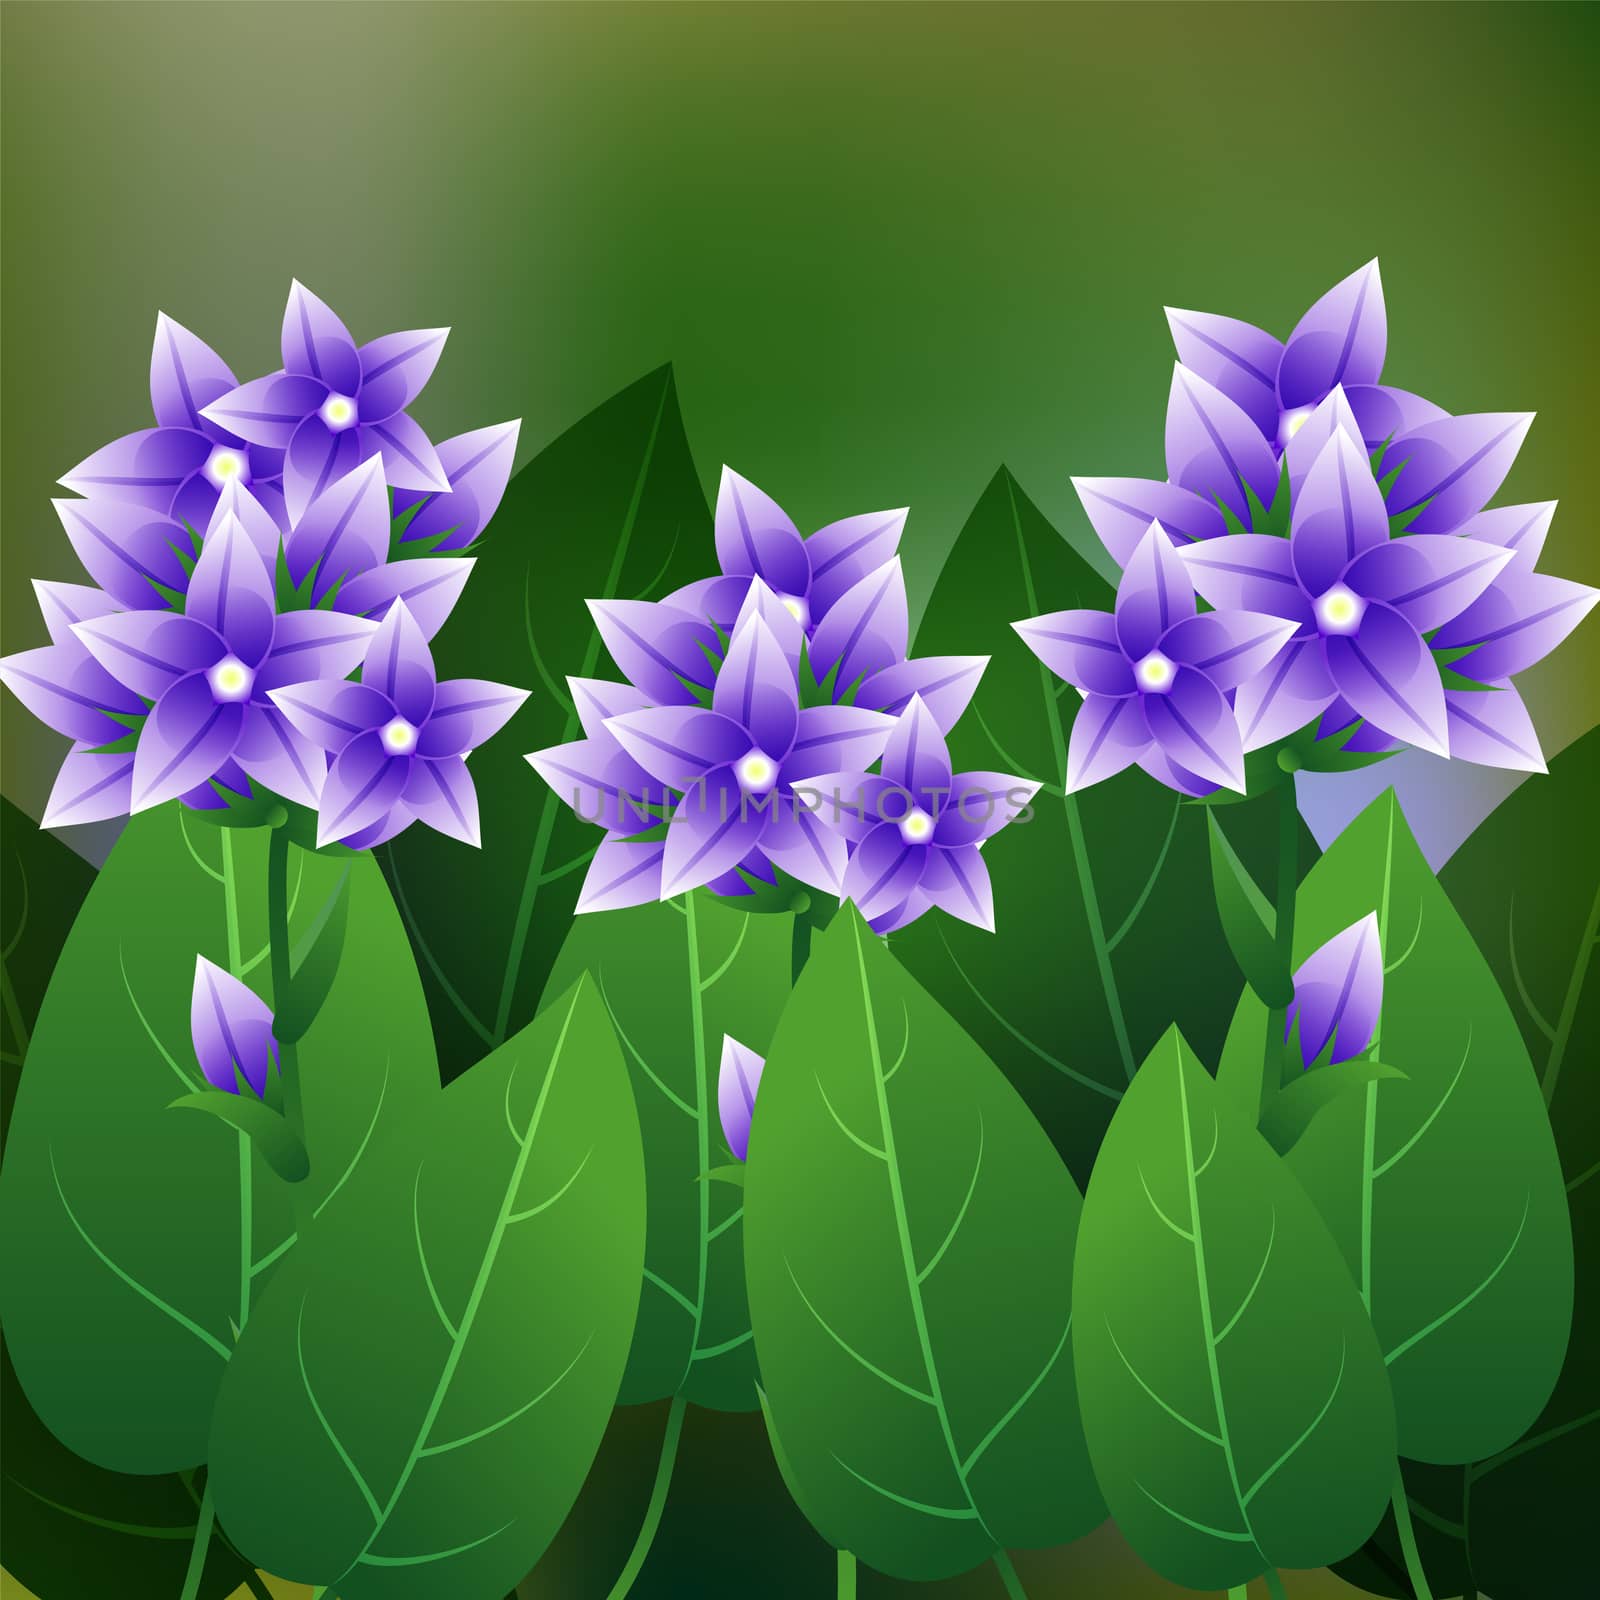 Beautiful Flower, Illustration of Campanula glomerata Flower or Harebell with Green Leaves on Tree Branch. illustration